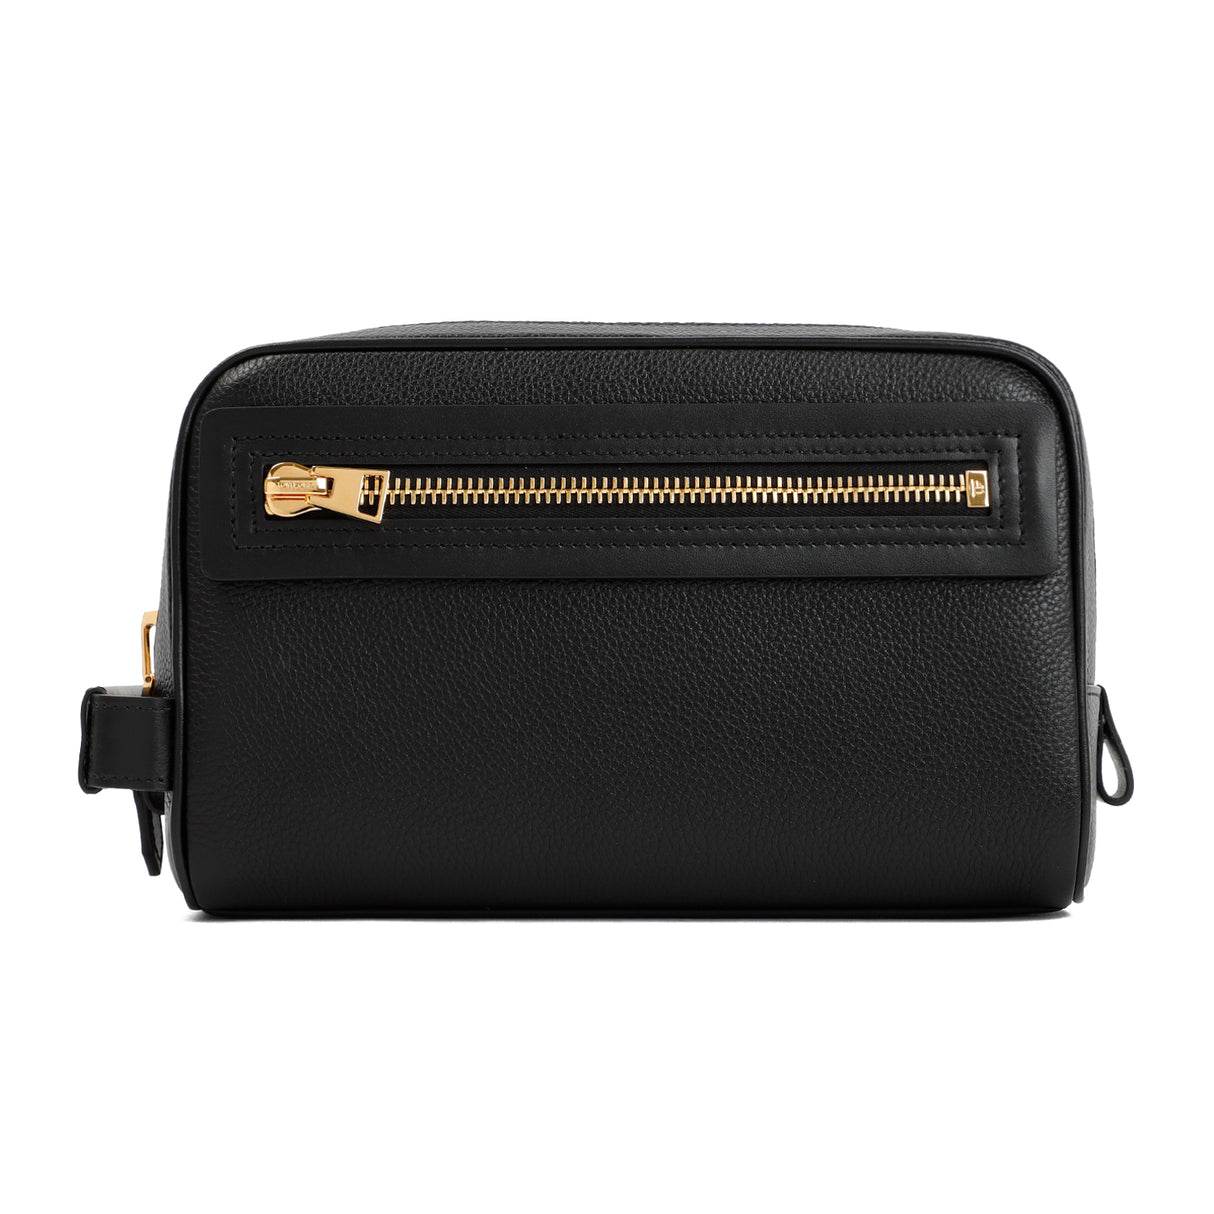 TOM FORD TOILETRY CASE